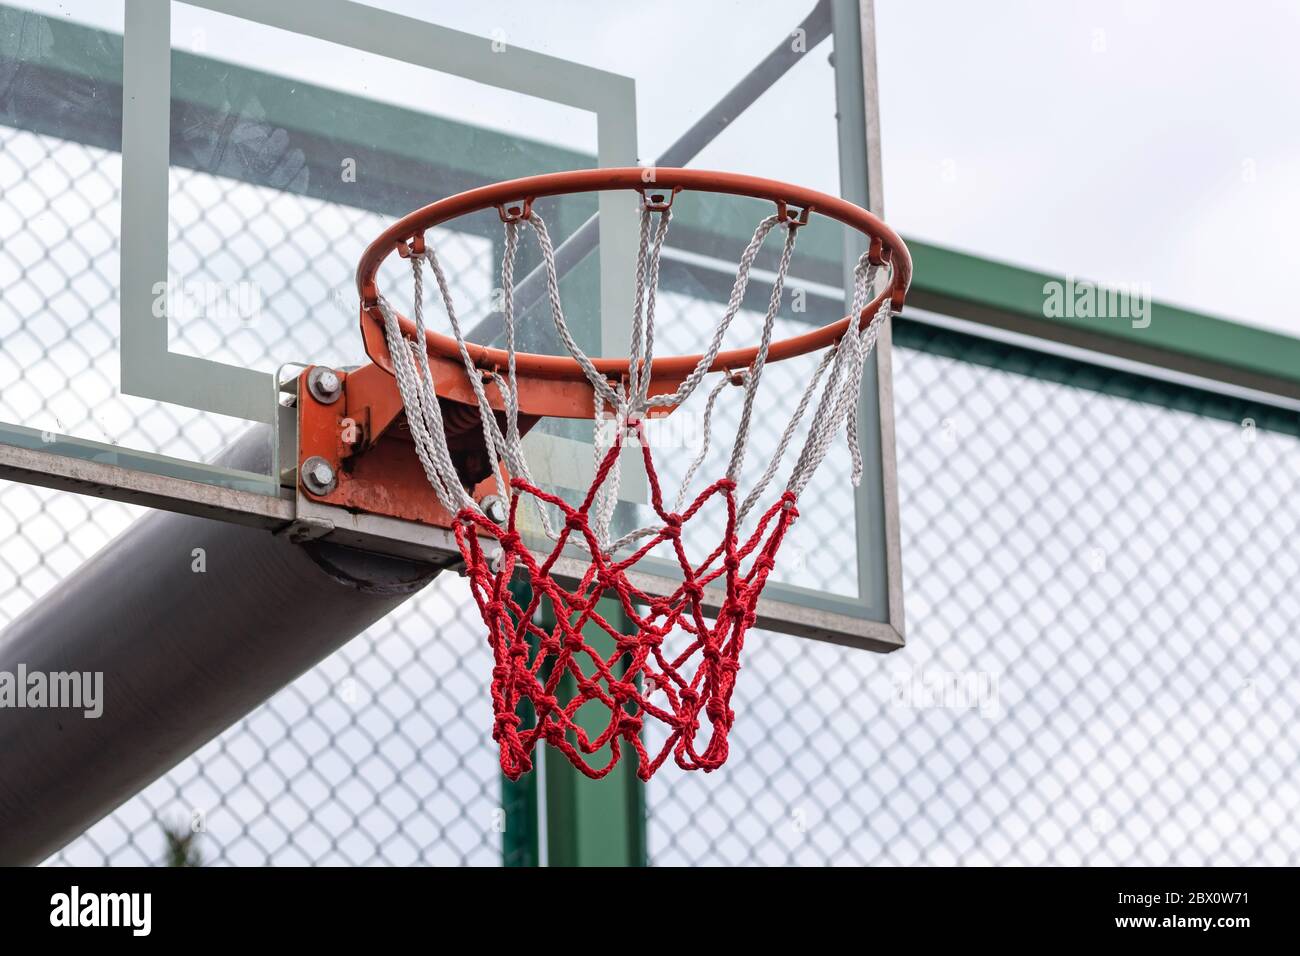 Basketball ring with a net for playing basketball outdoors Stock Photo